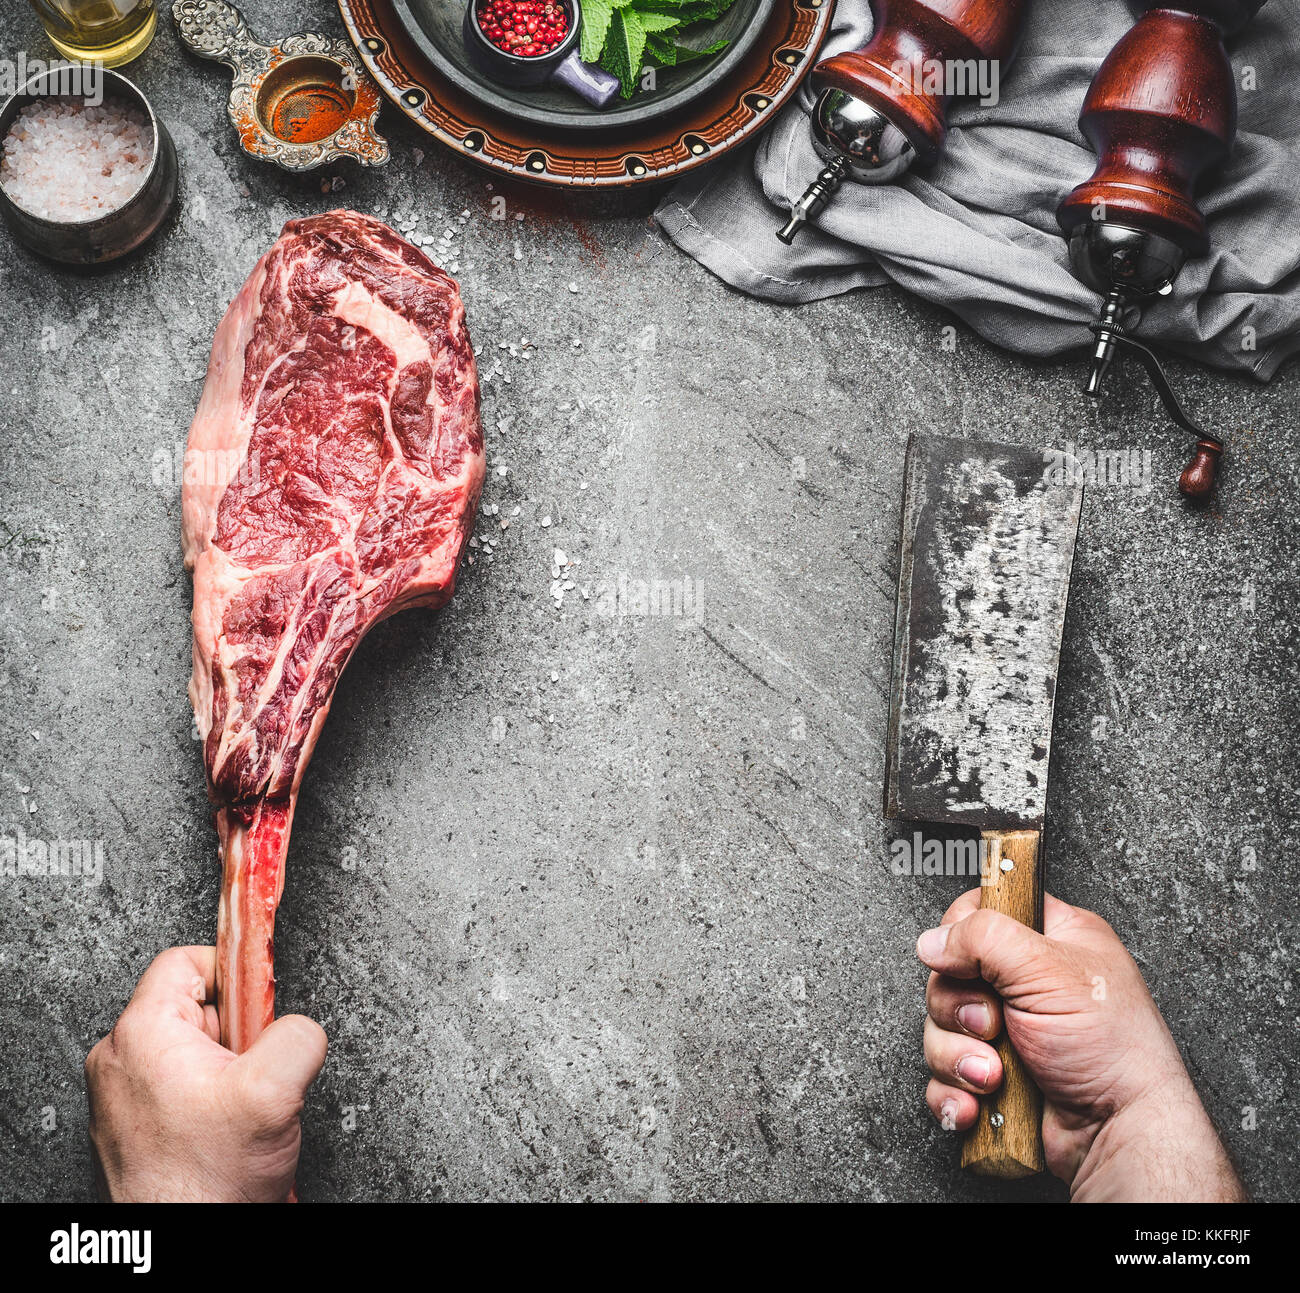 Male hands of  butcher or cook holding tomahawk beef steak and meat cleaver on dark rustic kitchen table background with cooking ingredients and condi Stock Photo